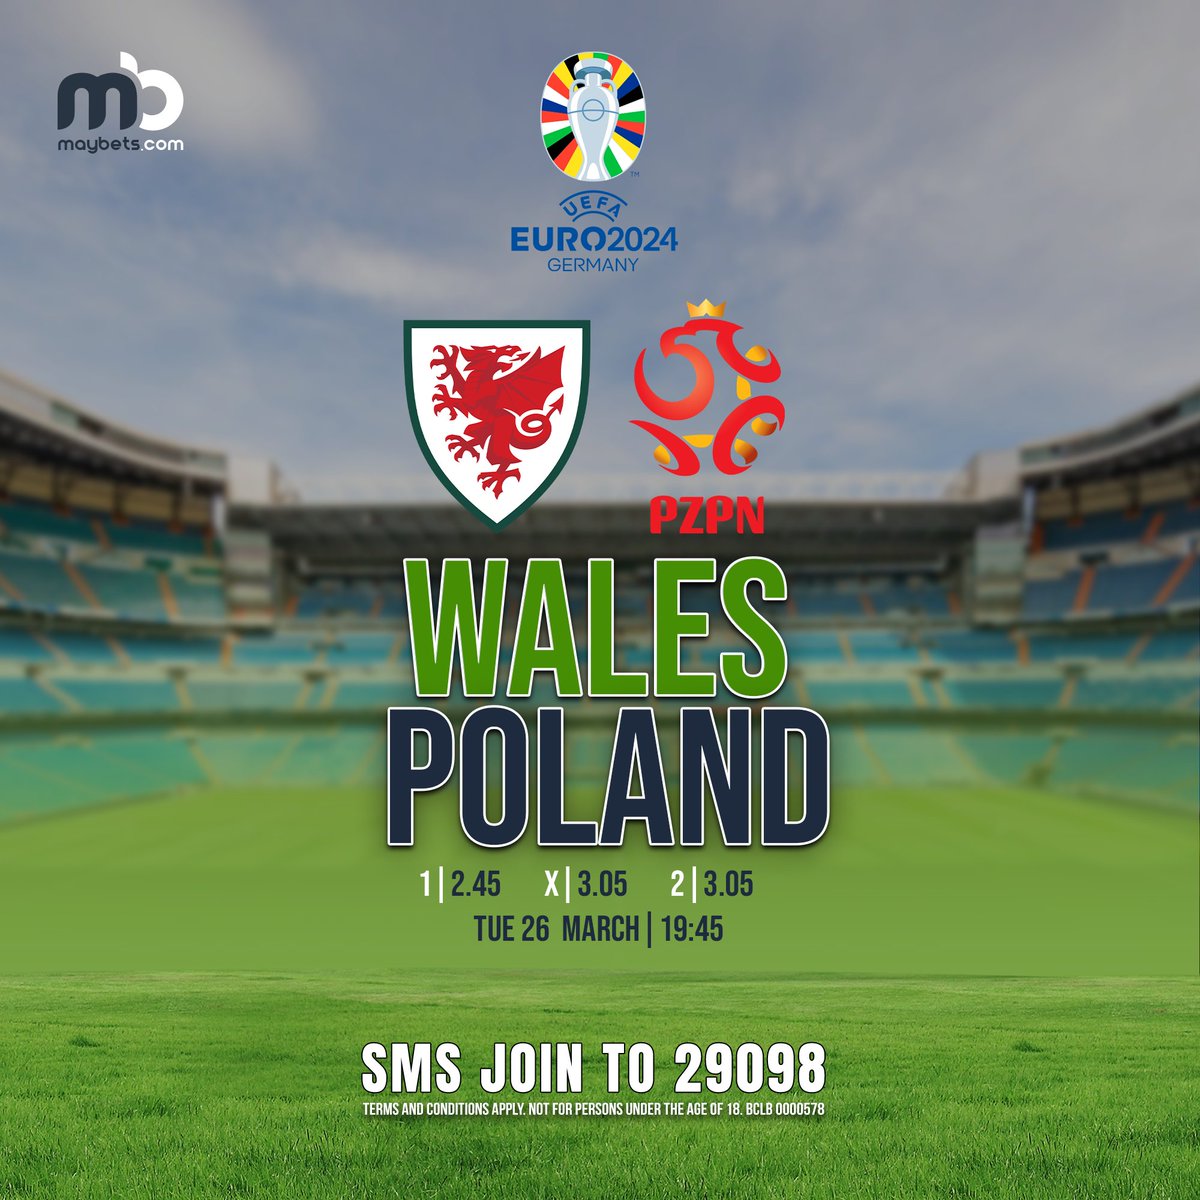 Wales na Poland Wana clash in a crucial play-off match for a spot in Germany! 🏆 Team zote  zime-come off impressive victories na  wako ready ku battle it out. 🏴🆚🇵🇱

Ni Kichwa, GG/NG, Over/Under? ⚽👀
Wekelea➡ bit.ly/karibu-maybets

💰⚽️ #Wales #Poland #EuroQualifiers